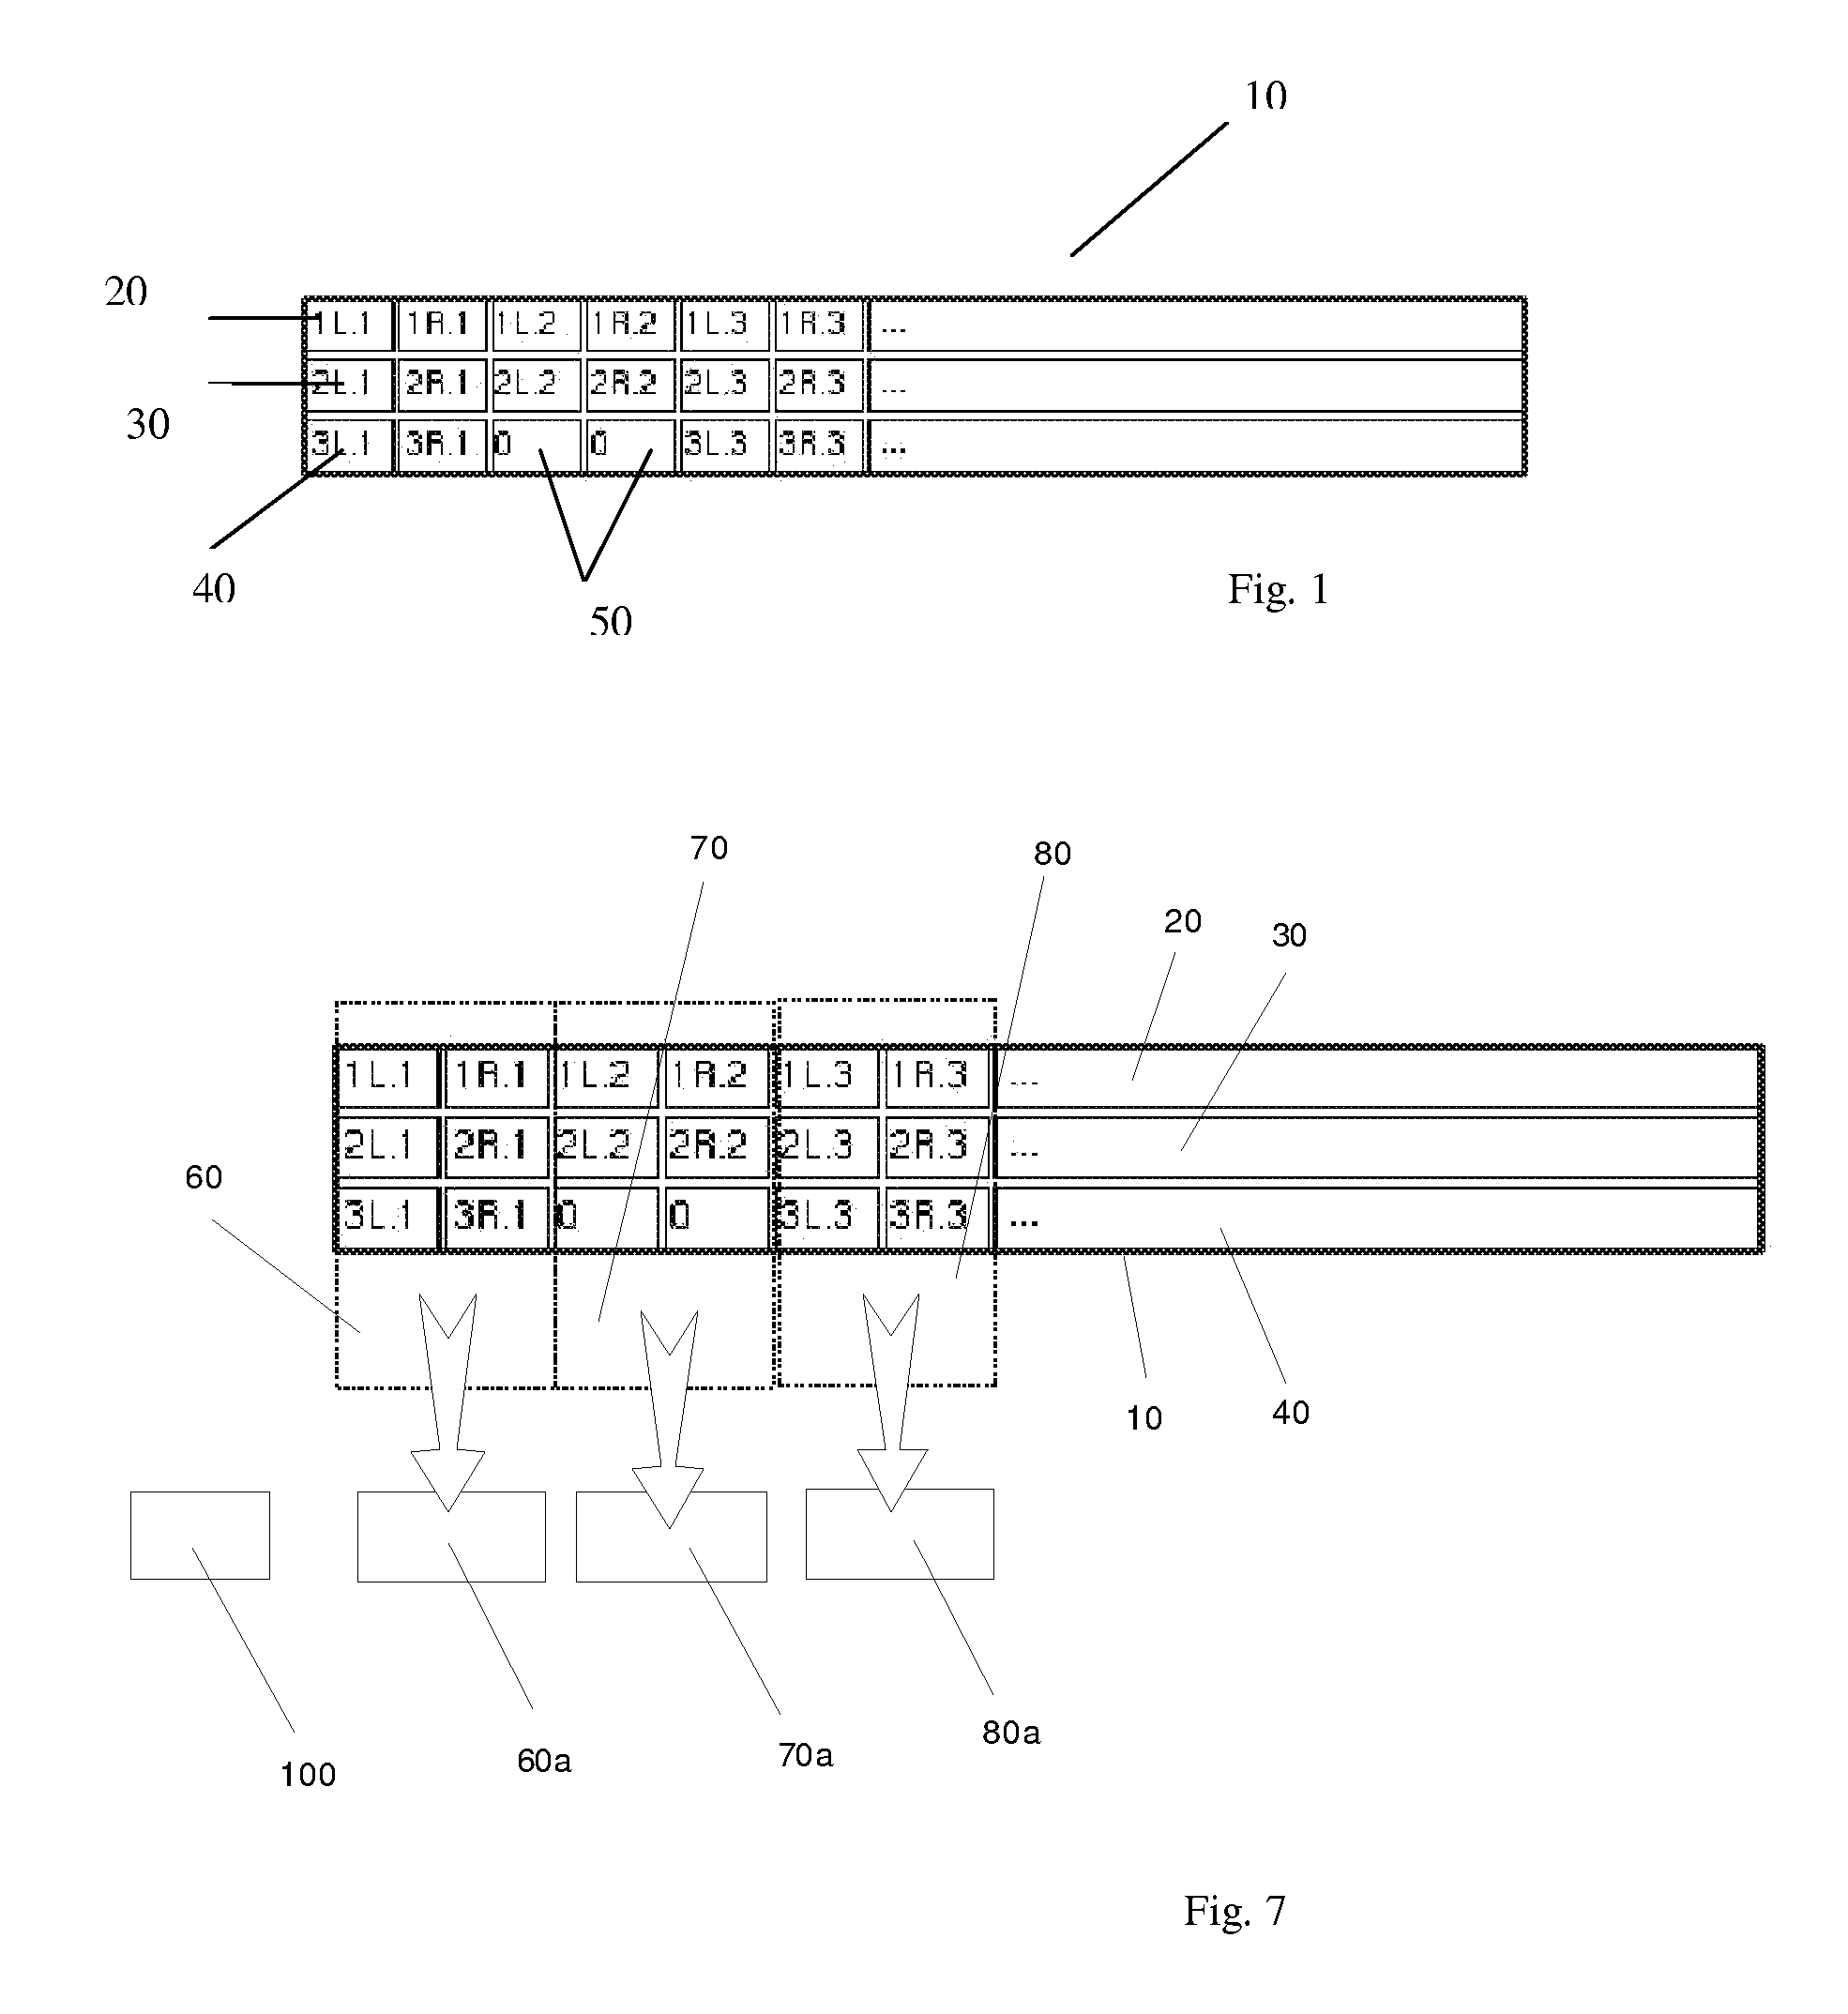 Multi-channel audio data distribution format, method and system